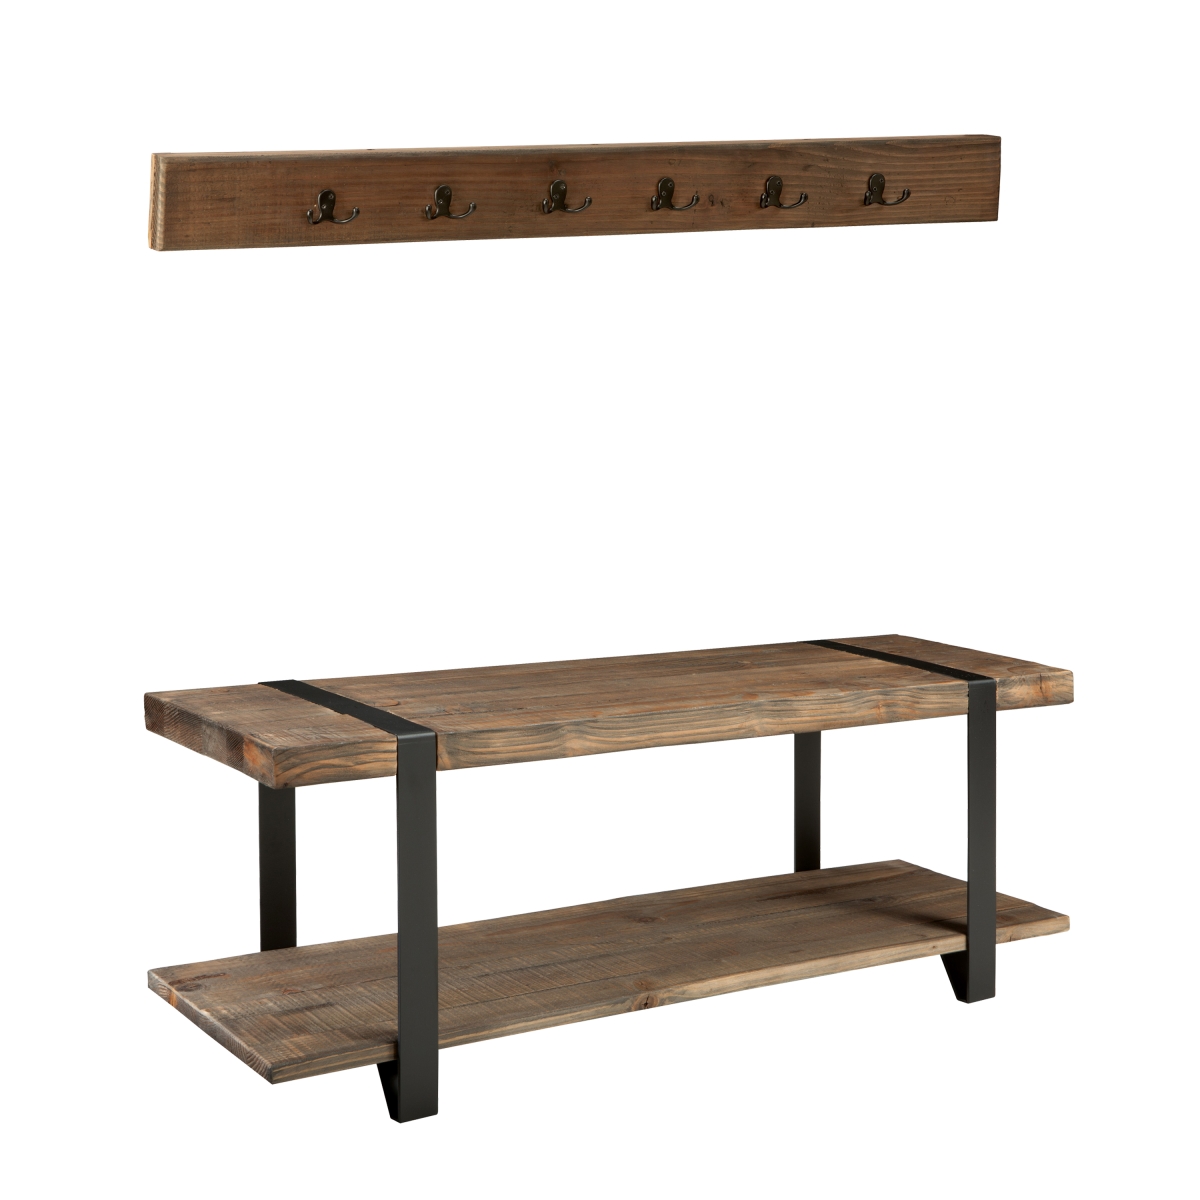 Picture of Alaterre AMSA032920 48 in. Modesto Metal & Reclaimed Wood Storage Coat Hook with Bench